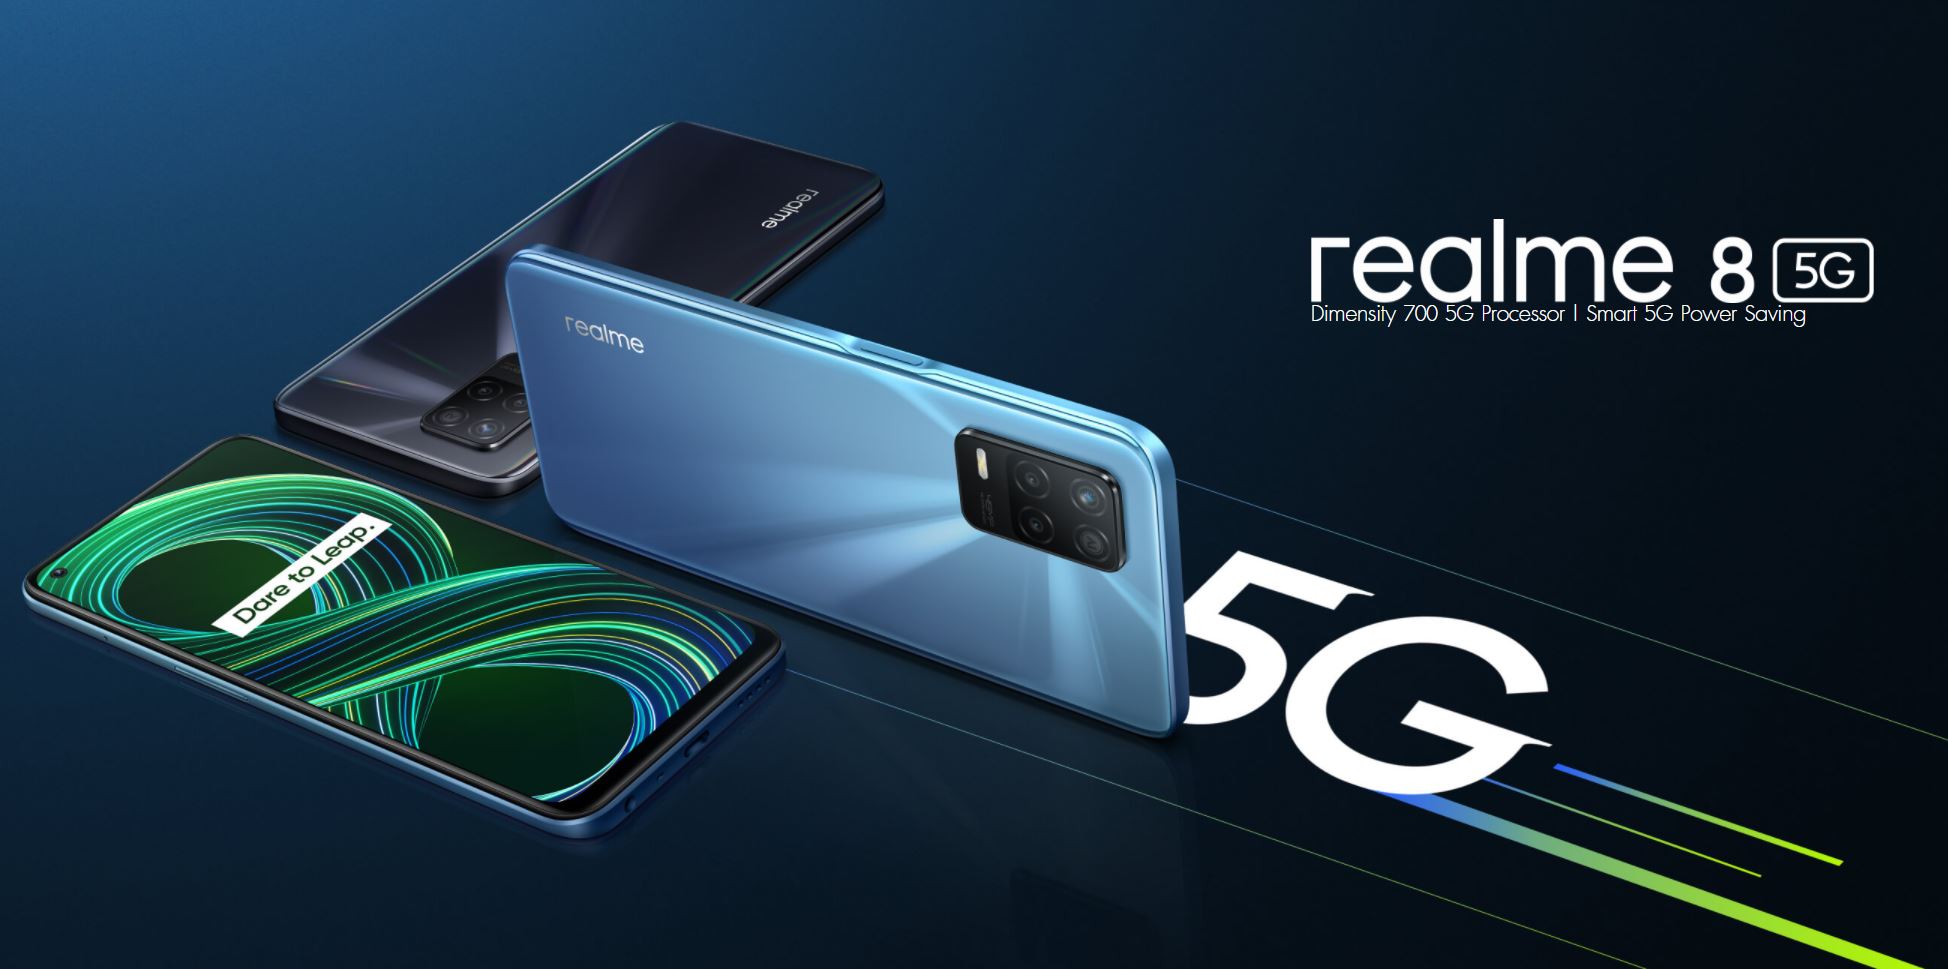 Realme 8 5G is available at $254 discount on AliExpress